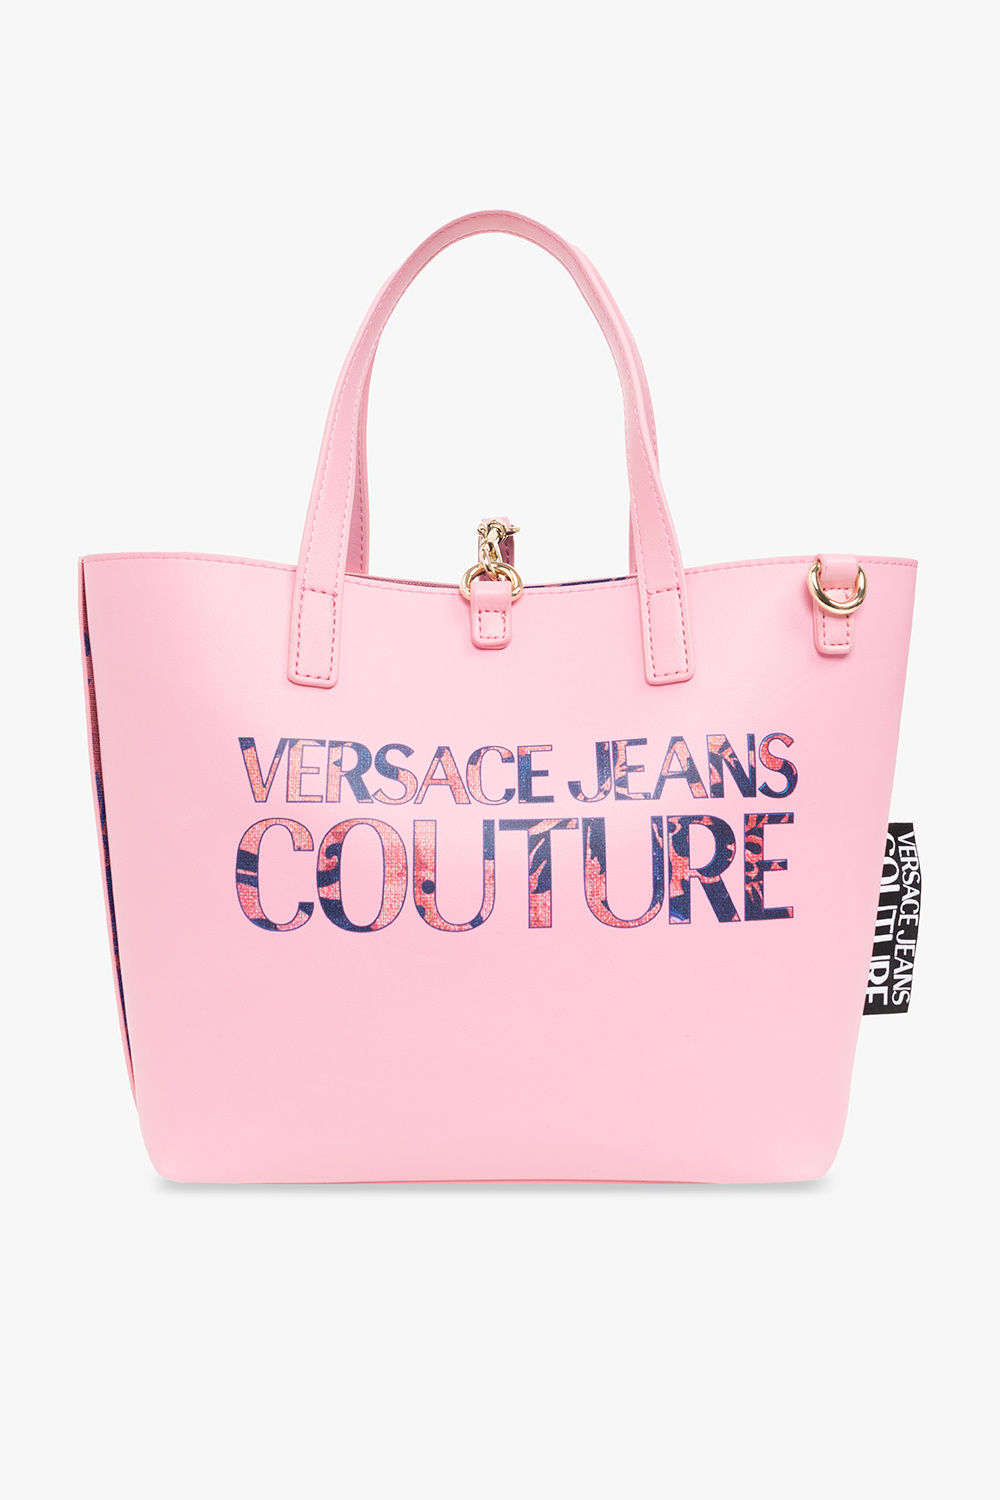 Versace Jeans Couture Reversible Bag in Synthetic Leather